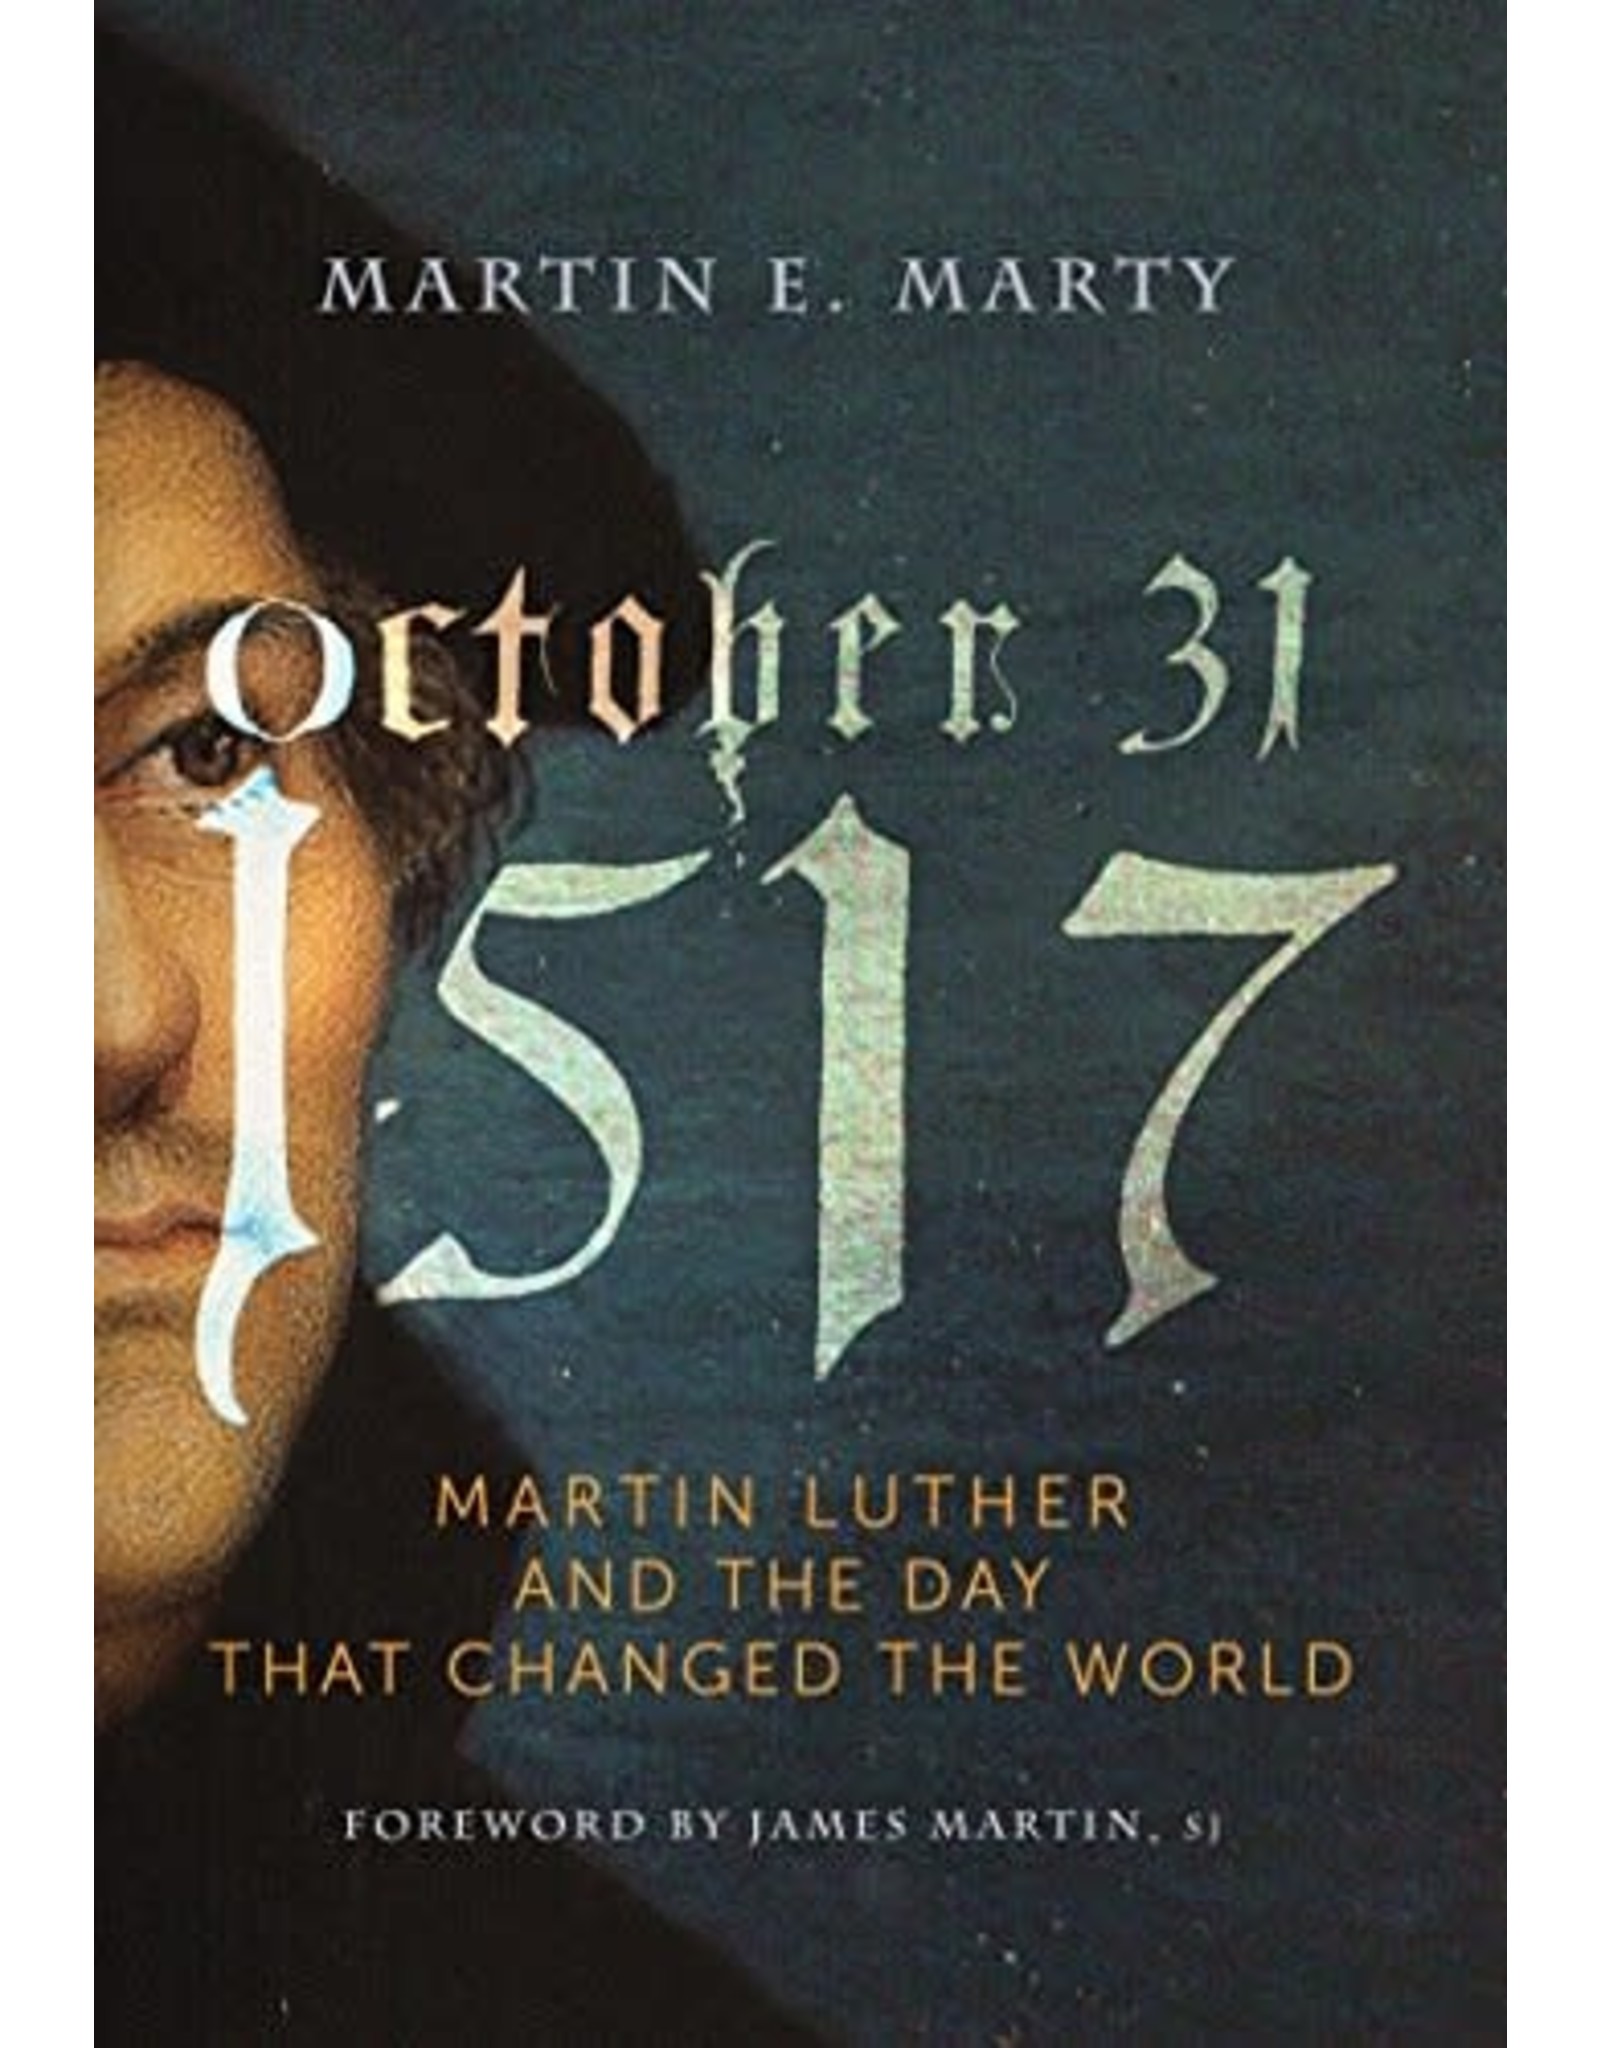 Paraclete Press October 31 1517: Martin Luther and the Day that Changed the World by Martin E. Marty (Paperback)